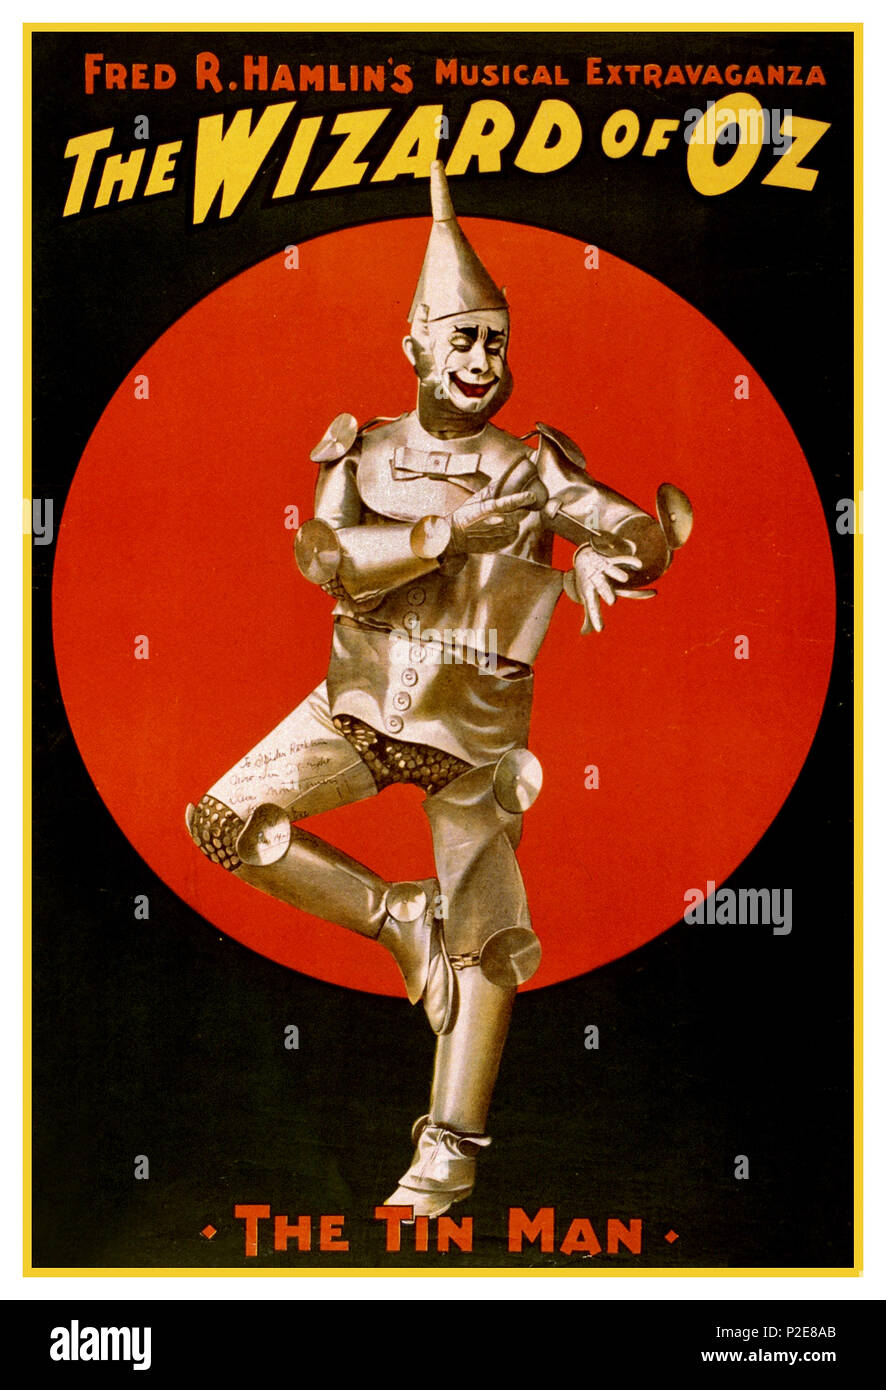 Vintage 1930’s Musical Poster ‘ The Wizard of Oz’  The Tin Man. Poster for Fred R. Hamlin's musical extravaganza, The Wizard of Oz. Poster print, lithograph, Created by 'The U.S. Lithograph Co.' Dave Montgomery by Fred Stone. (David C. Montgomery played Tin Man) Jan. 14, 1936 The Wizard of Oz: An American Fairy Tale. Stock Photo